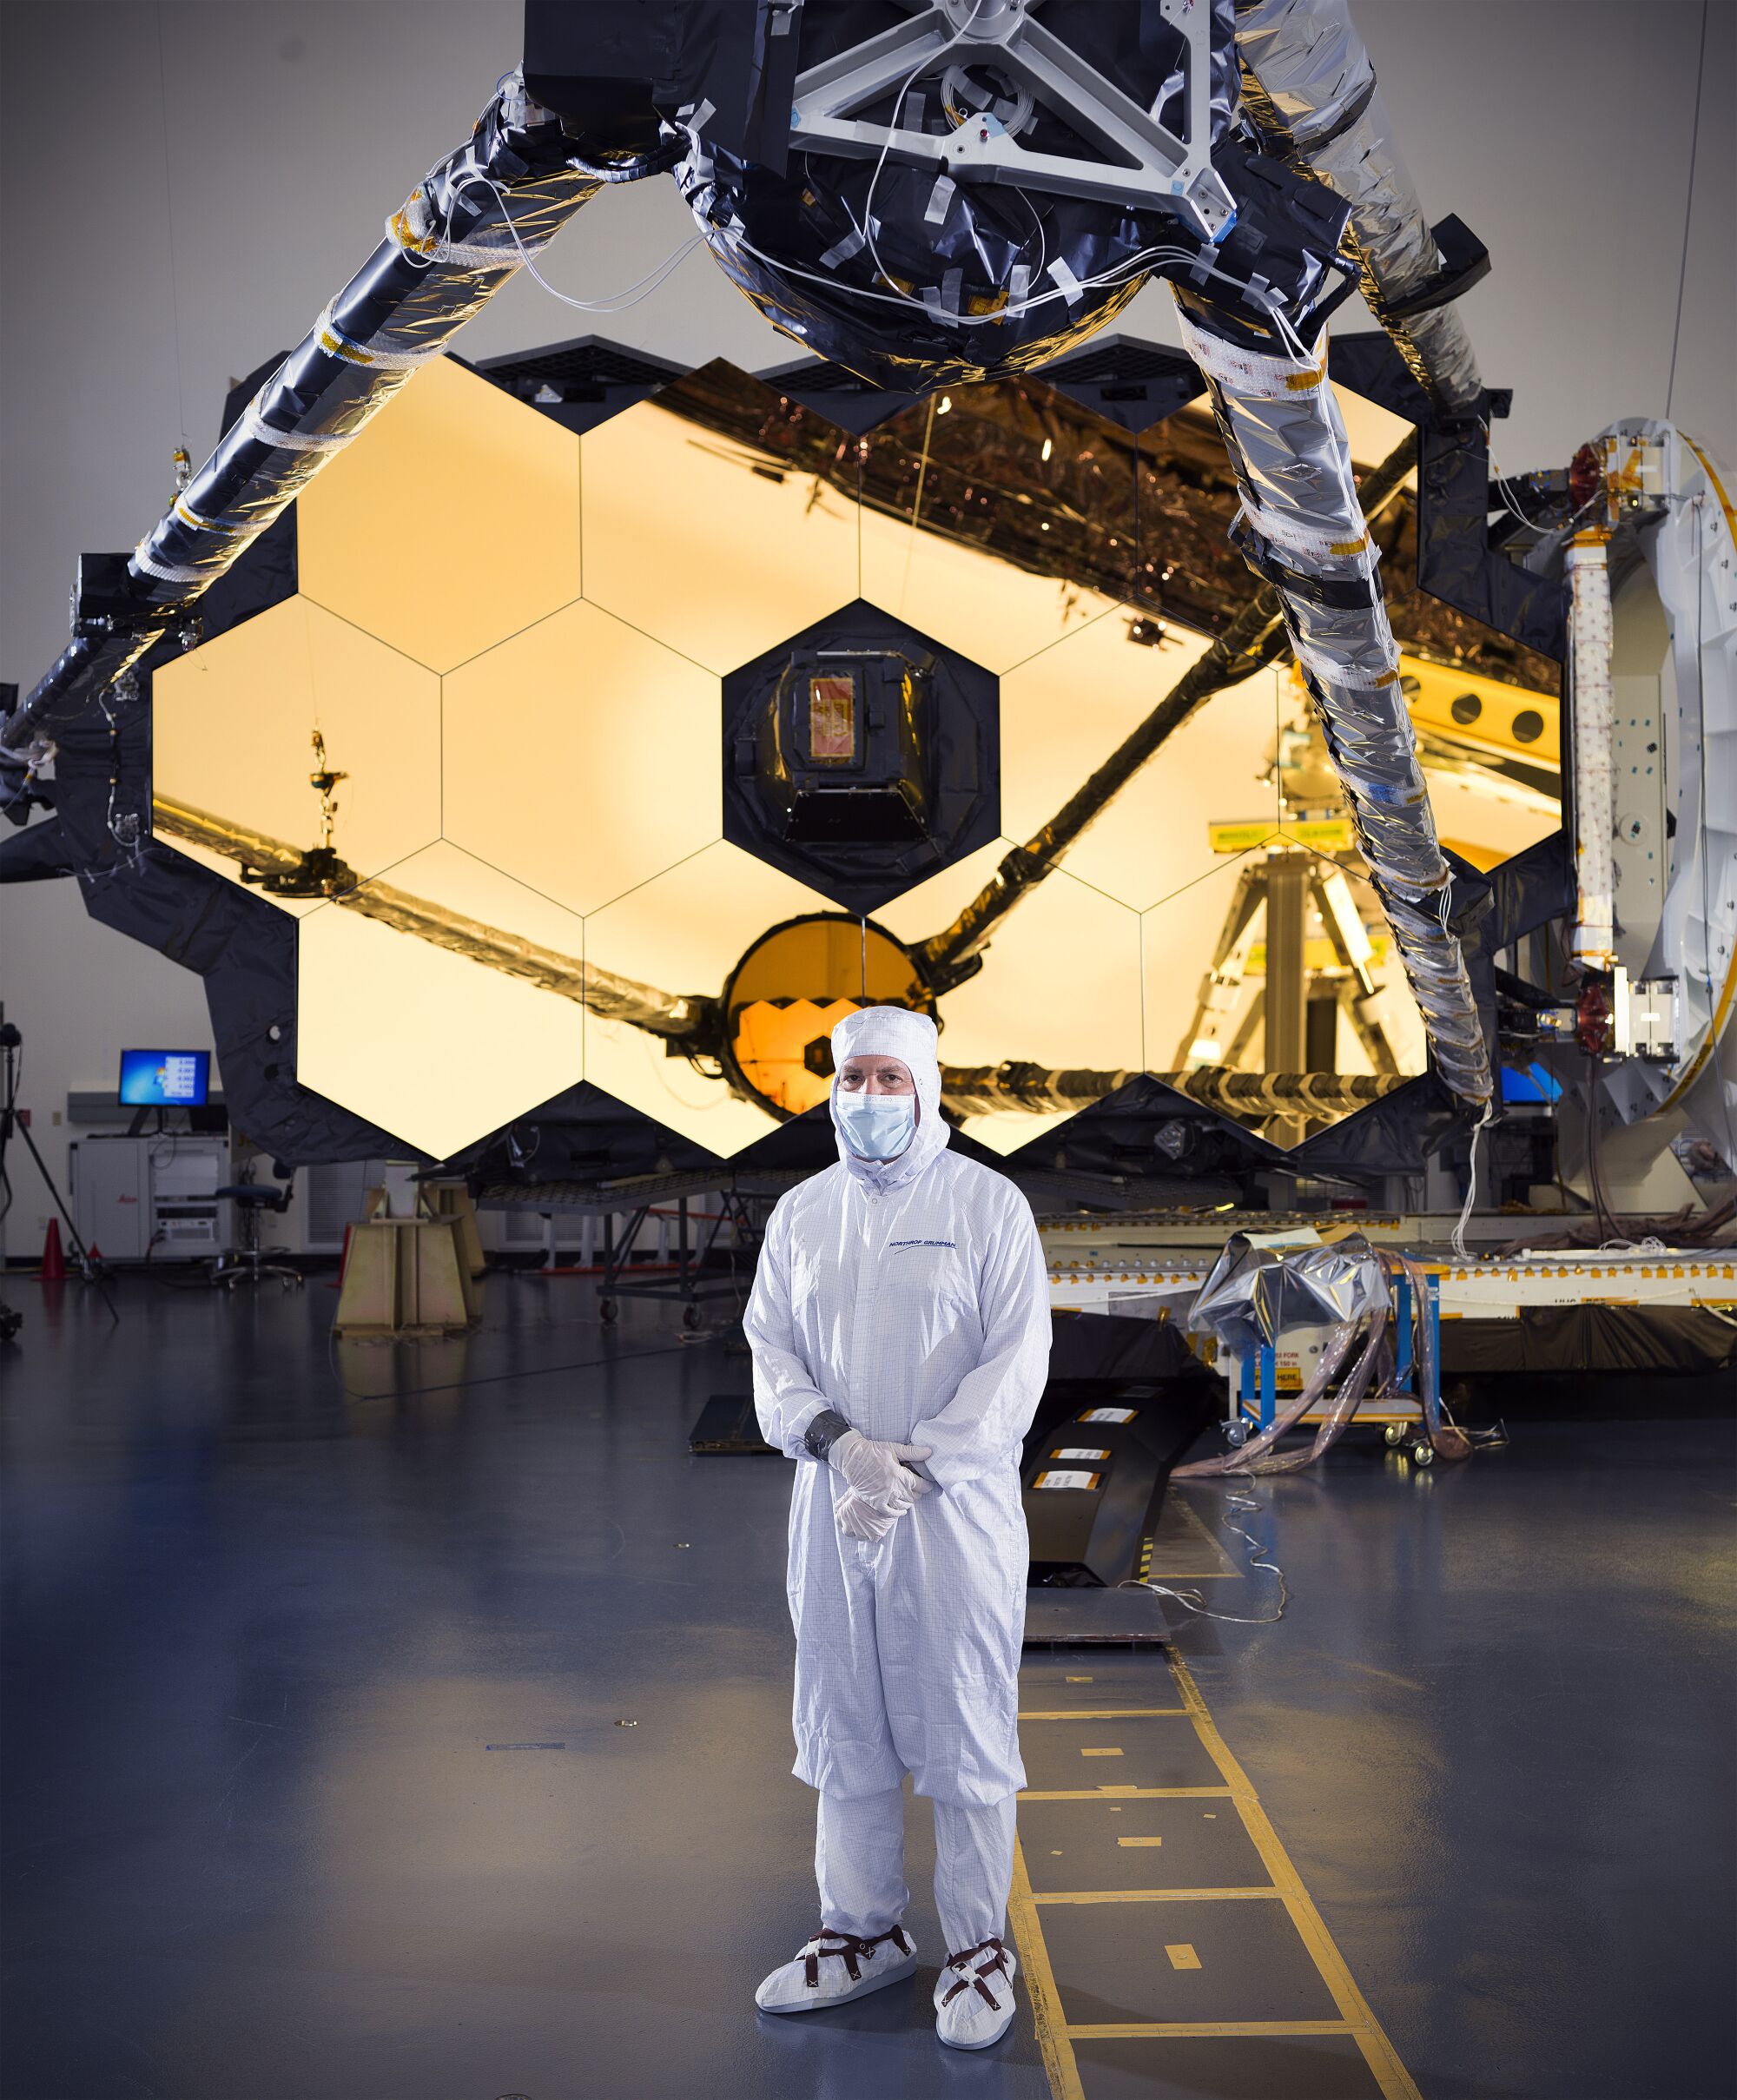 A man in a sanitary white outfit stands in front of the telescope mirror